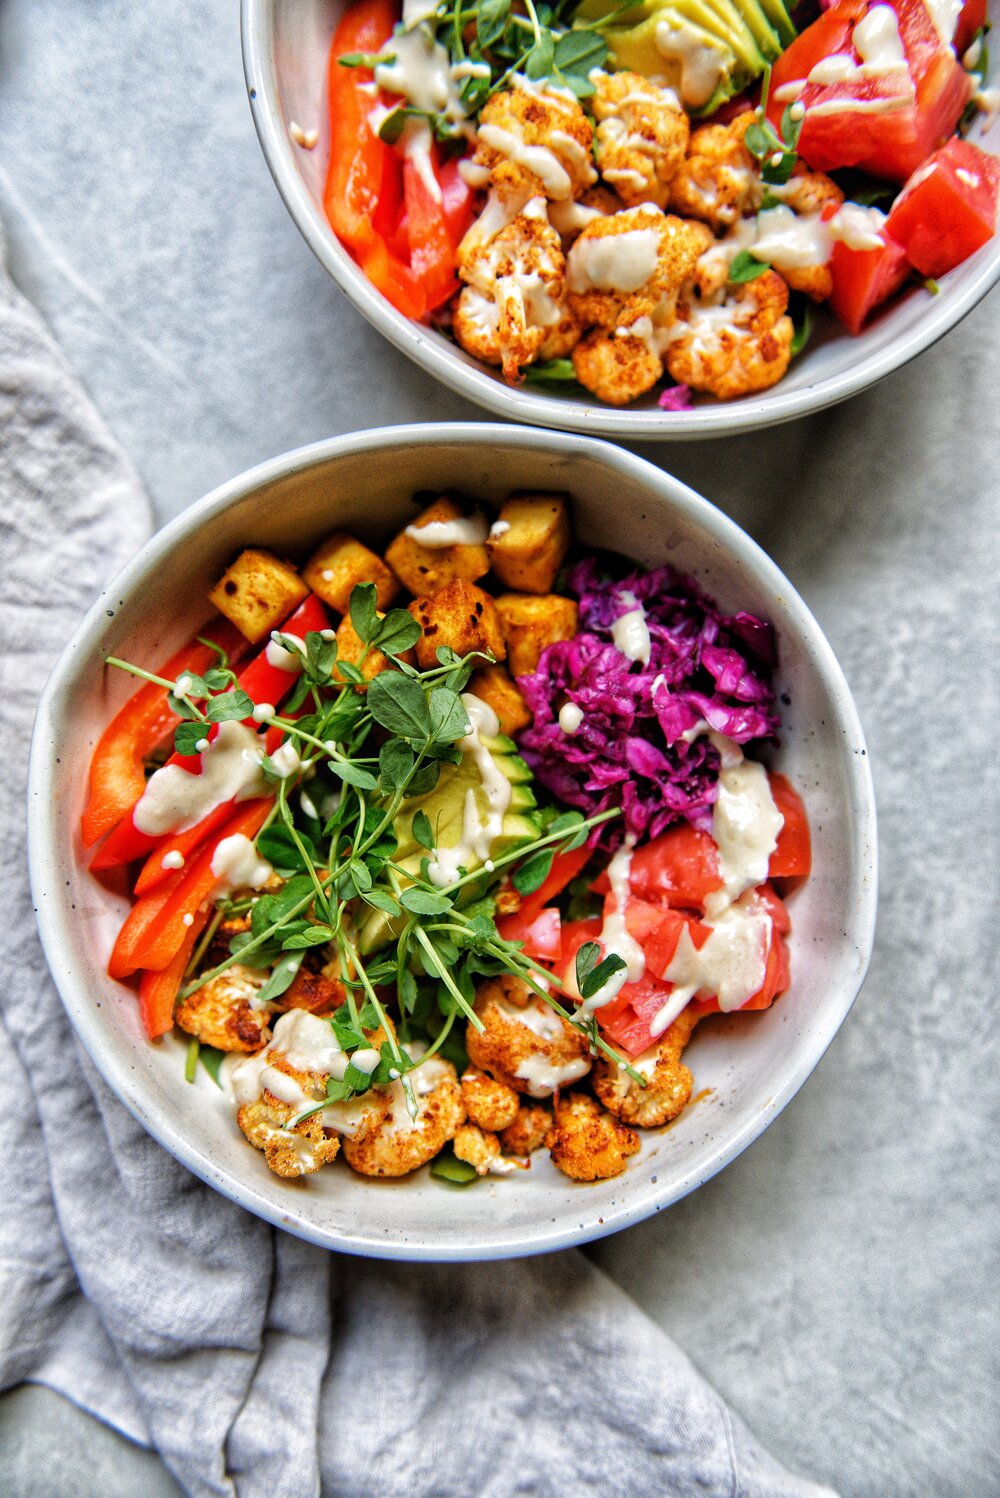 two bowls of beautifully colourful vegetables like microgreens, red pepper, cauliflower, tofu, cabbage and tahini dressing drizzled over all the ingredients.